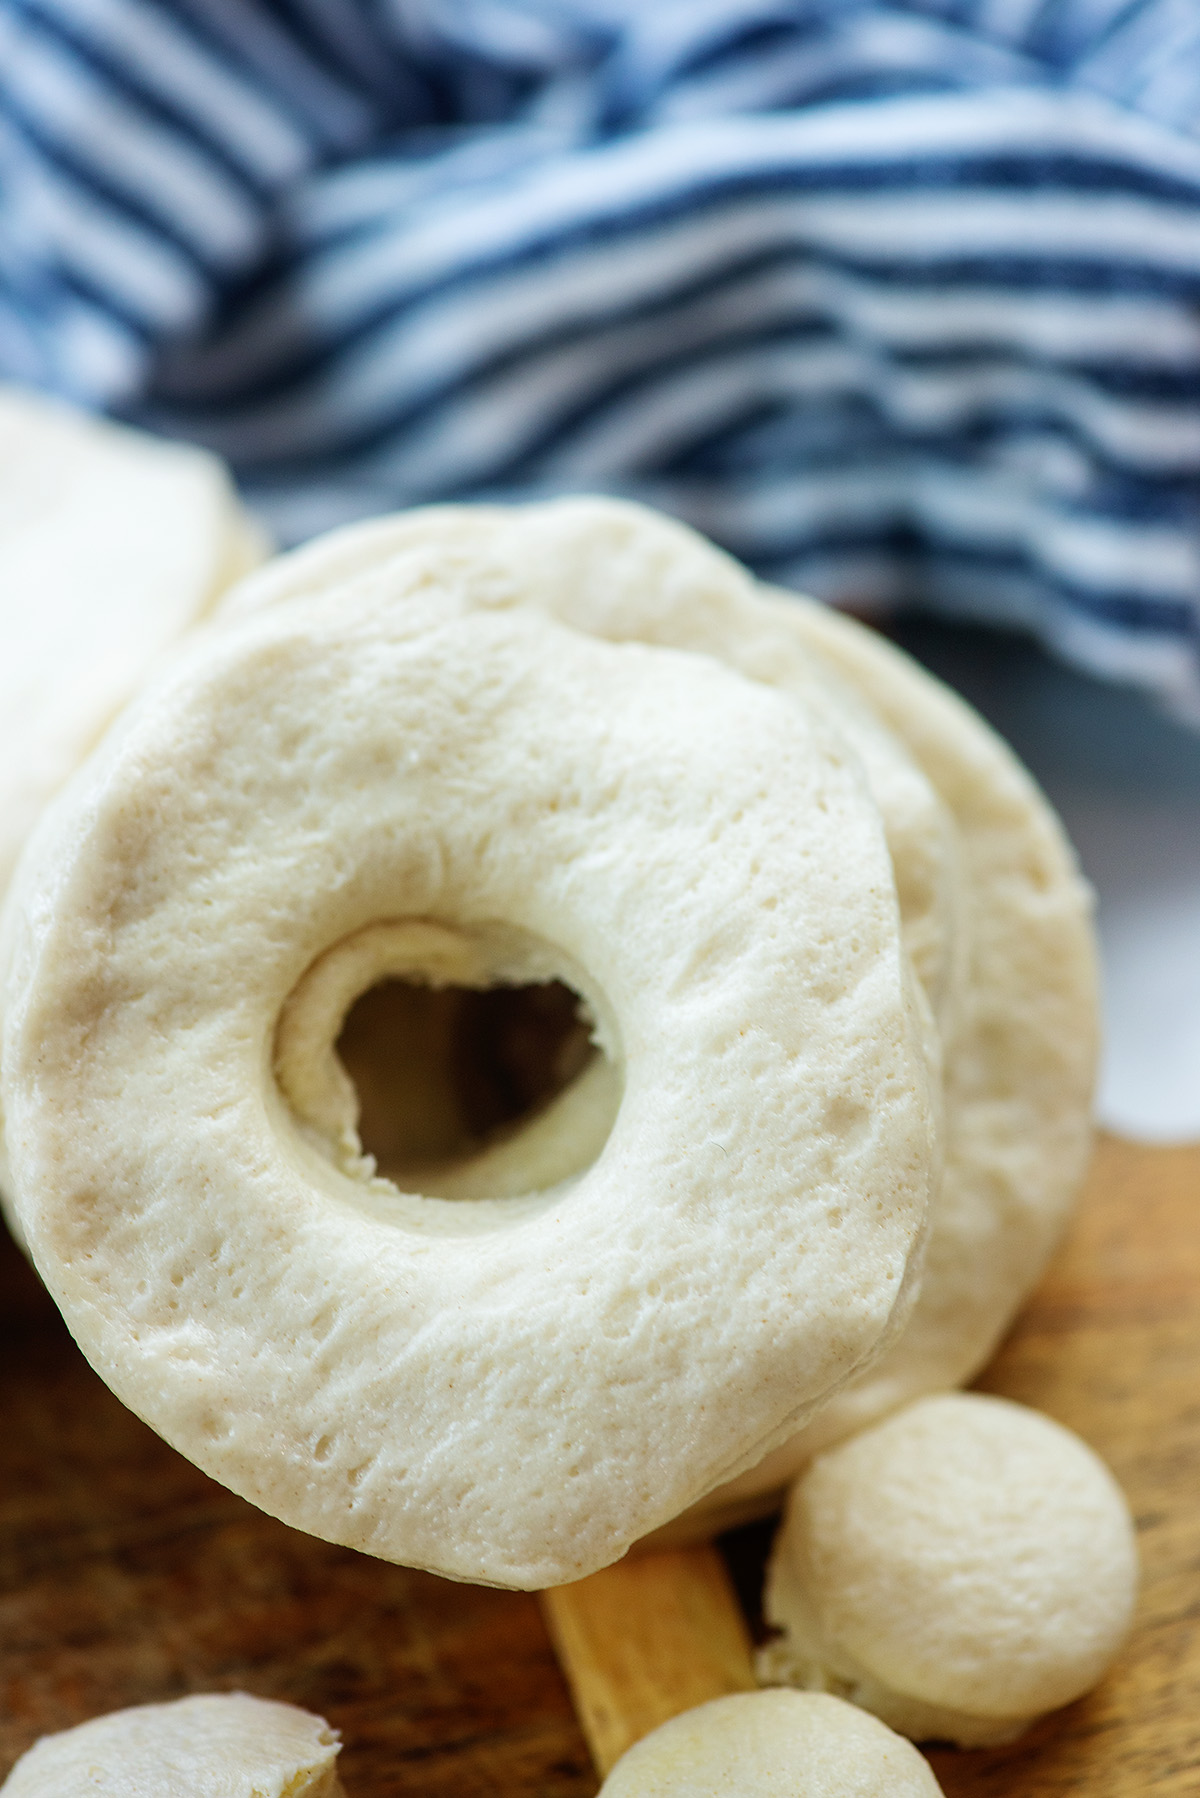 A close up of biscuit dough shapped like a donut